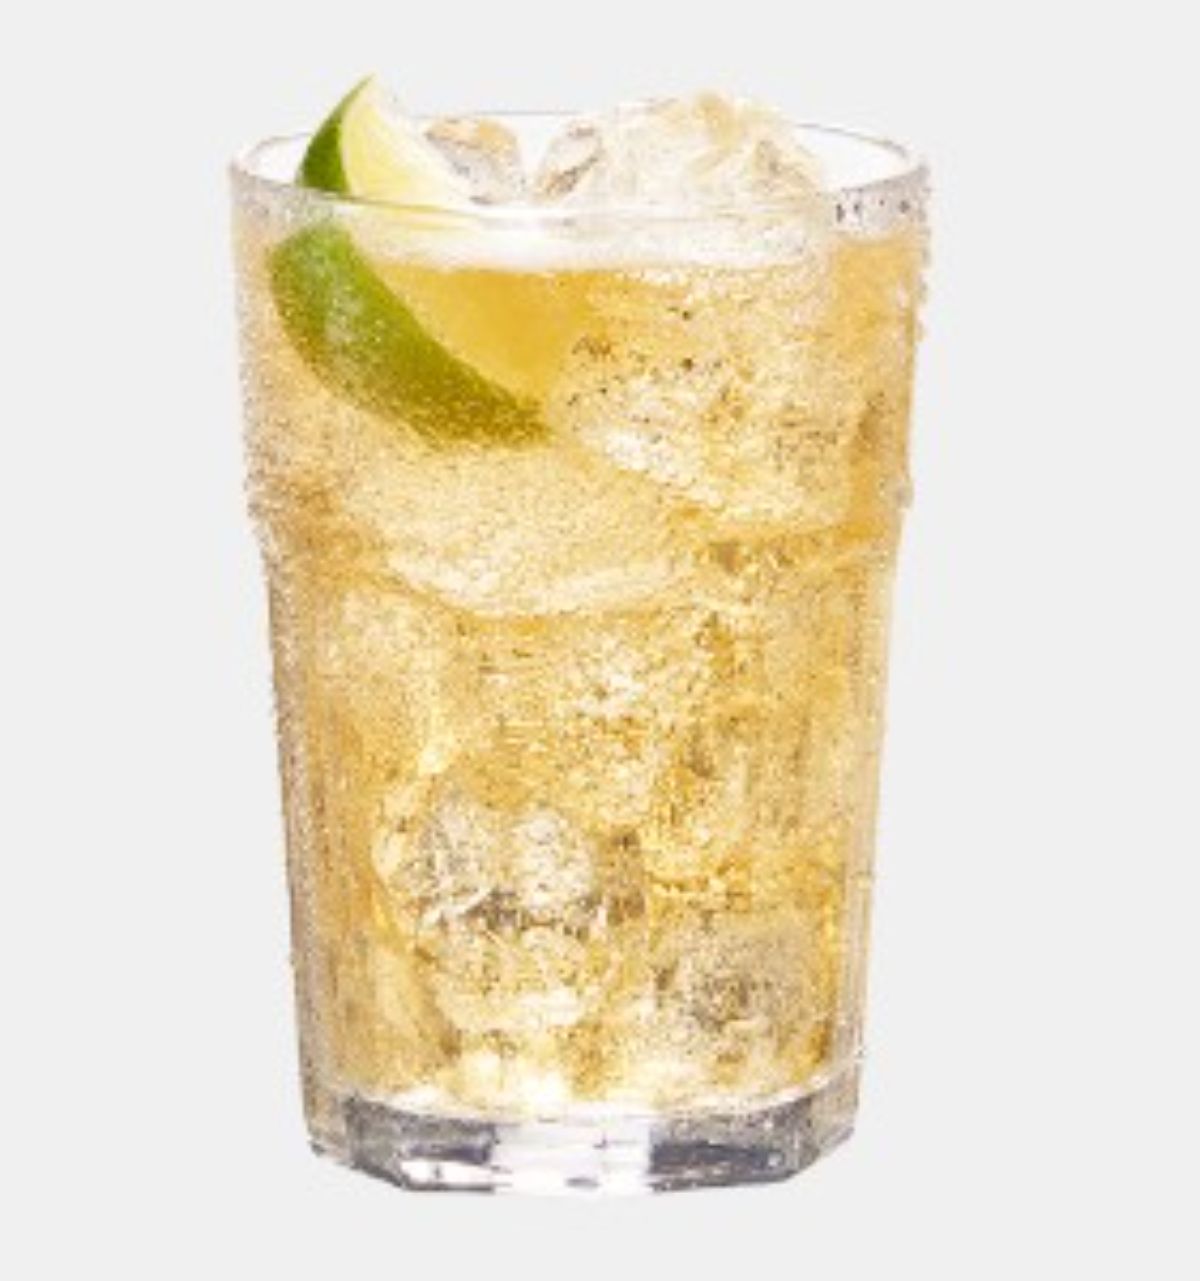 Captain and Ginger rum cocktail in glass cup with ice and a slice of lime.